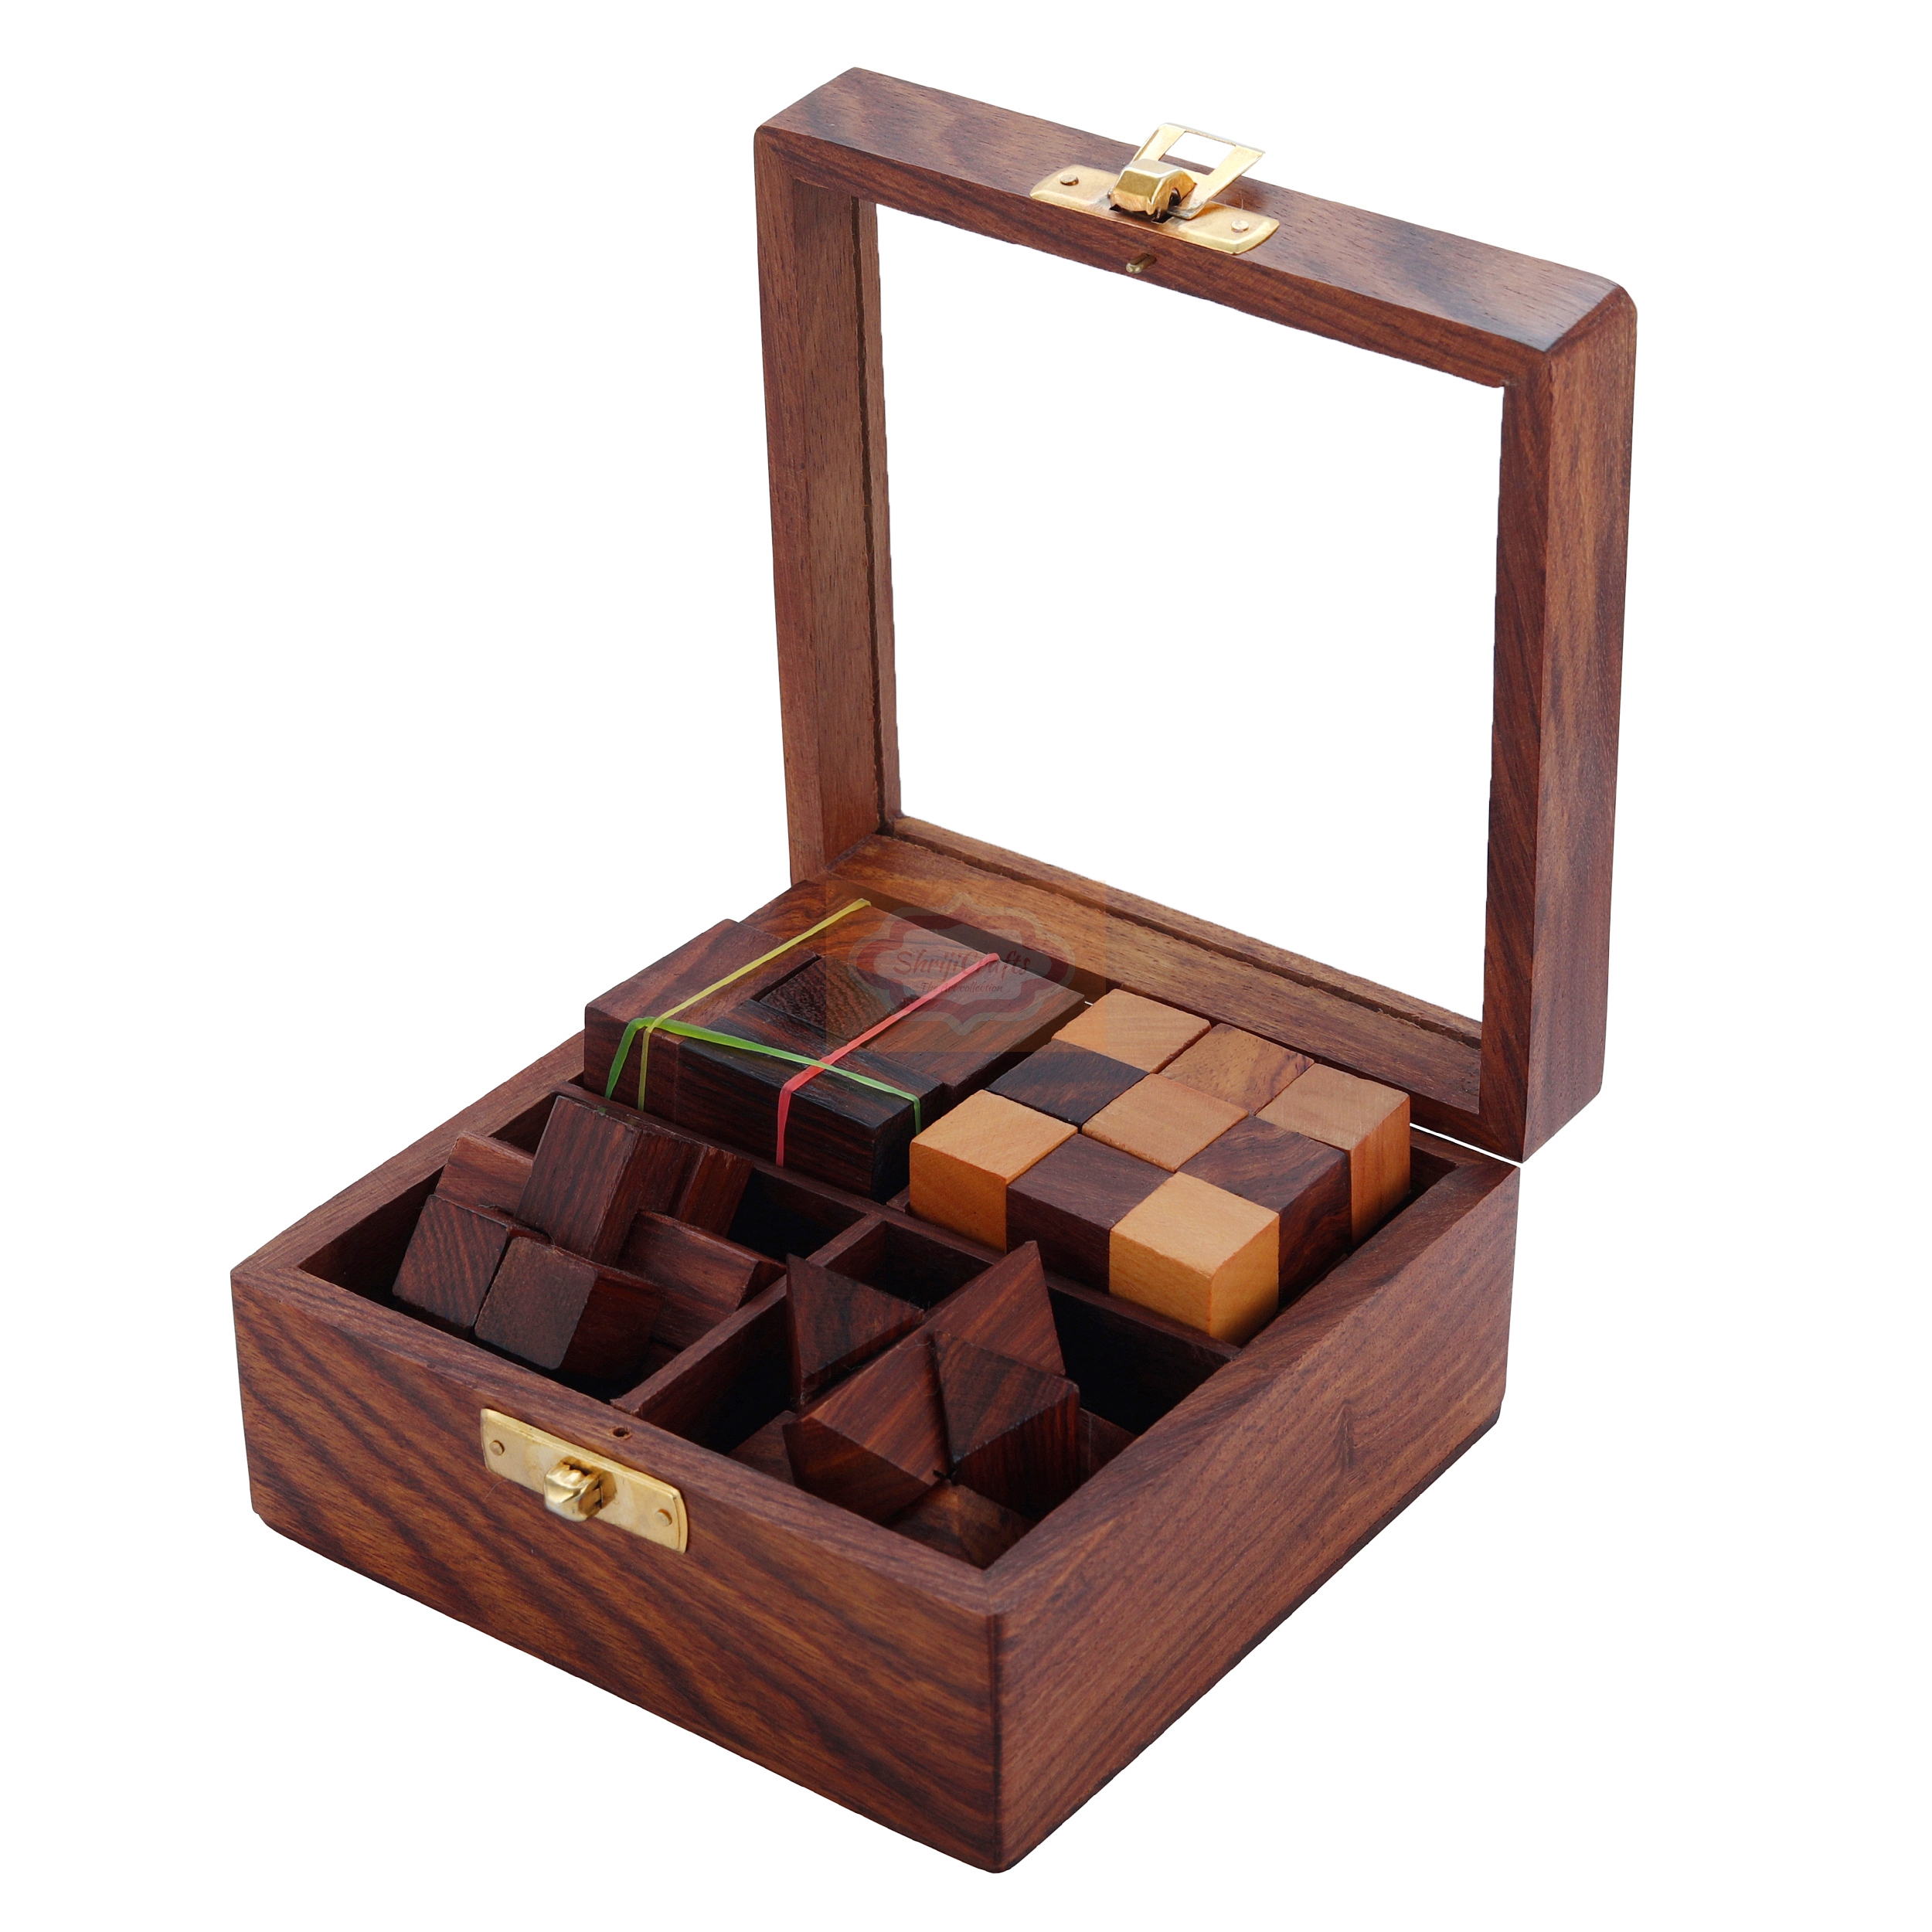 Shrijicrafts | ShrijiCrafts 4-in-One Wooden Cube Puzzle Games Set 3D Puzzles Brain Teaser Game for Kids and Adults